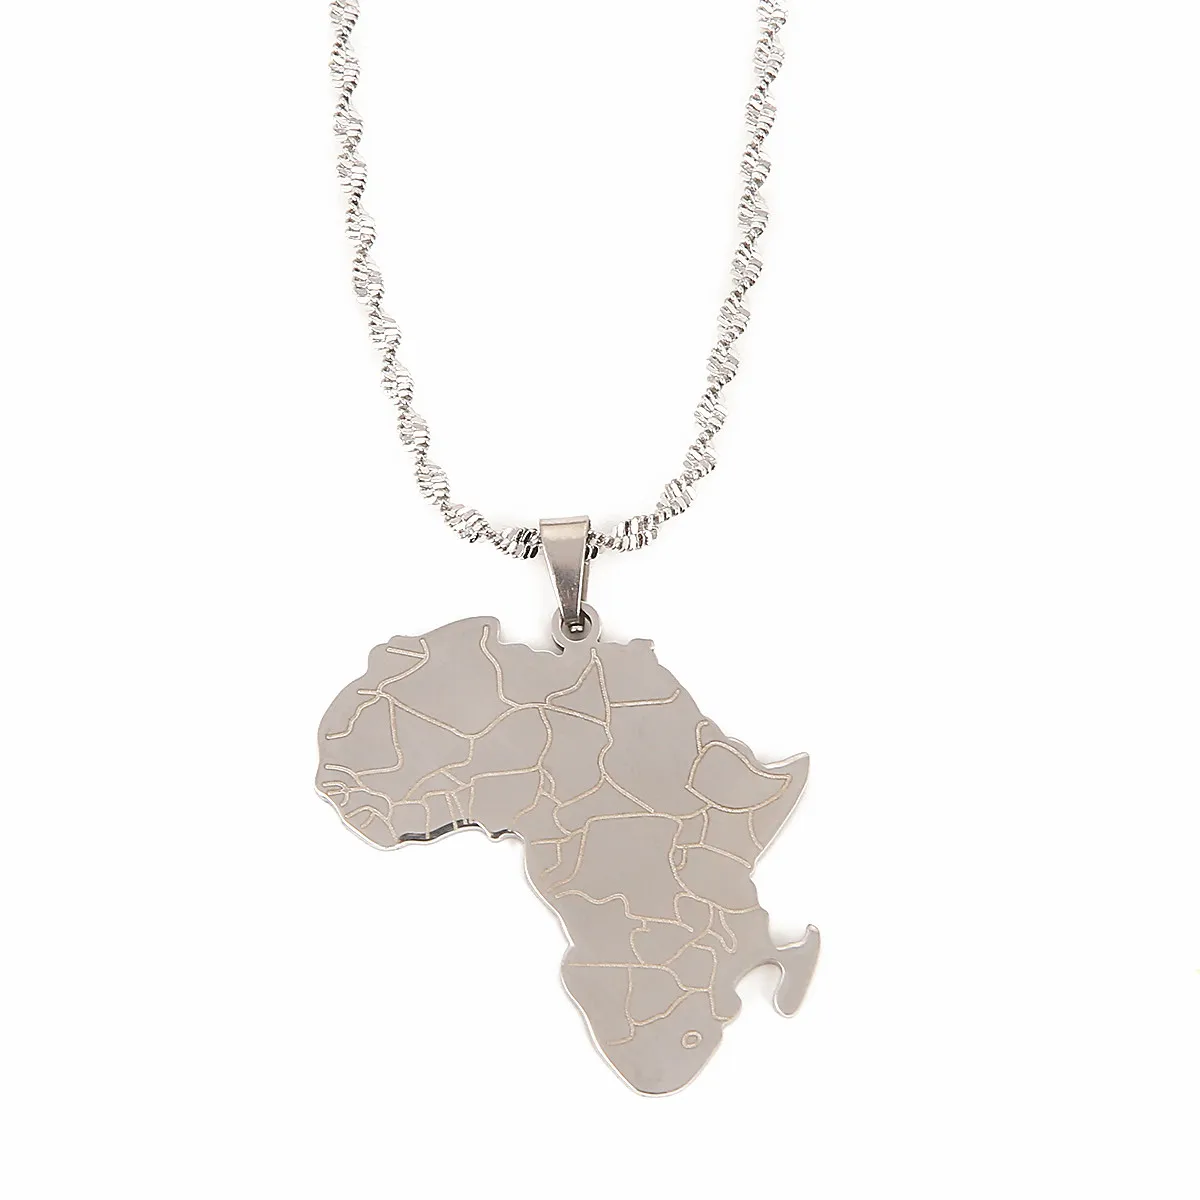 Stainless Steel Silver Color African Map Pendant Necklace Fashion of Africa Jewelry | Украшения и аксессуары